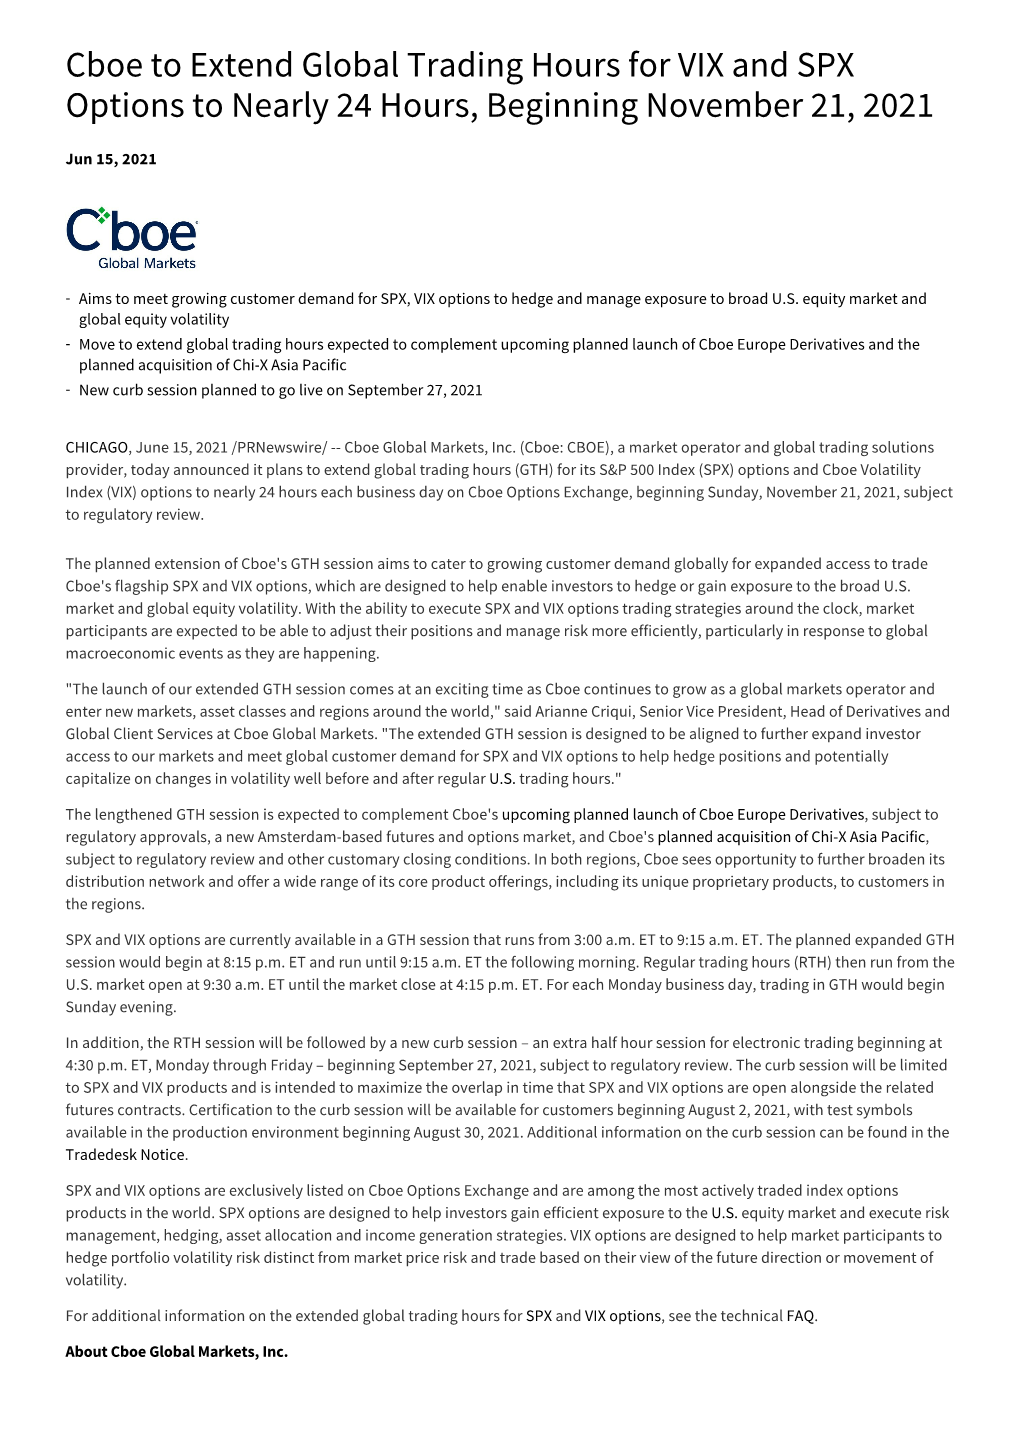 Cboe to Extend Global Trading Hours for VIX and SPX Options to Nearly 24 Hours, Beginning November 21, 2021